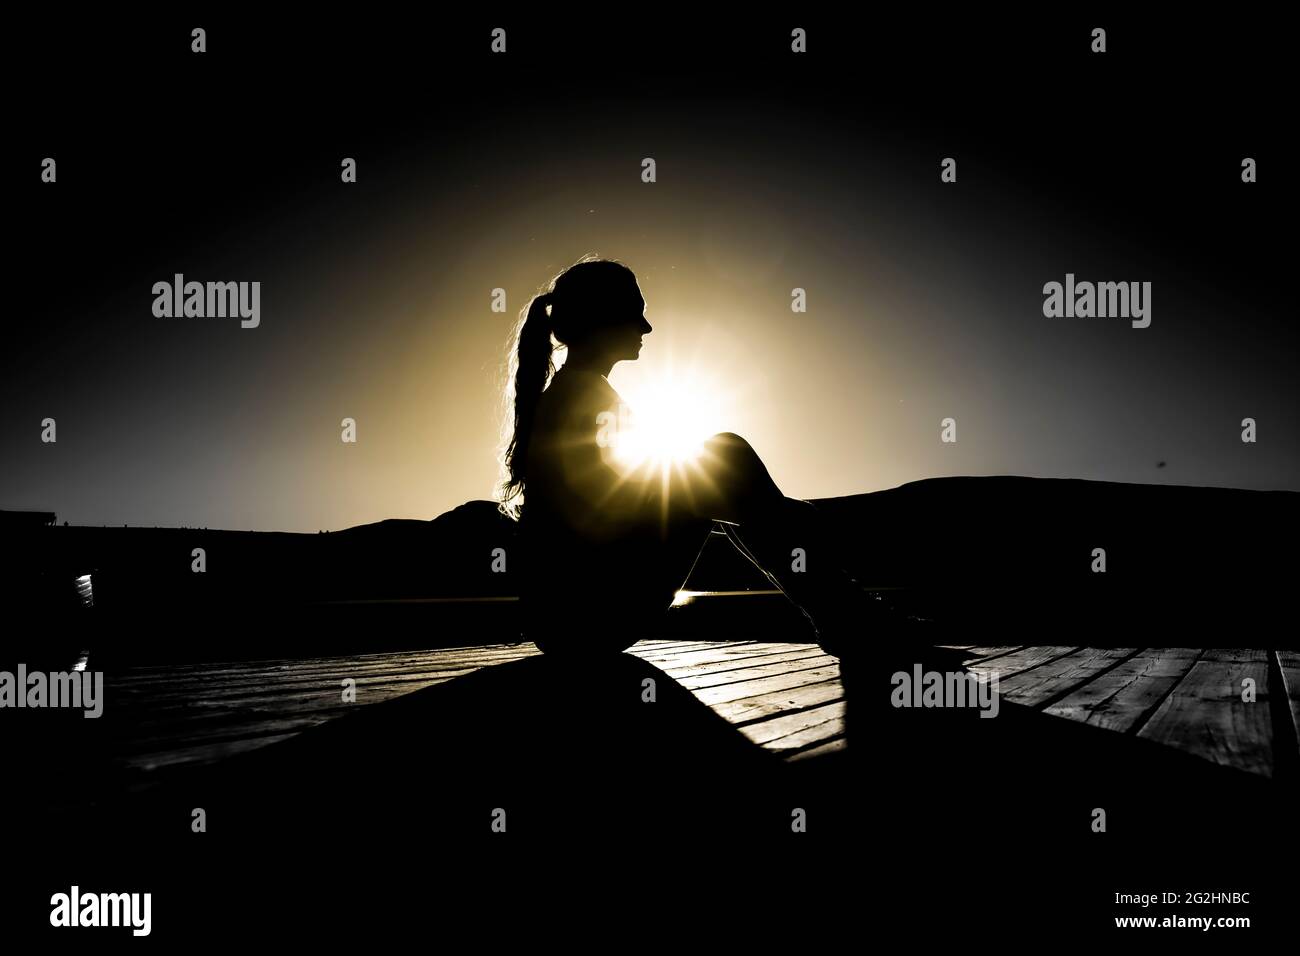 Silhouette of a seated woman with ponytails in the backlight Stock Photo